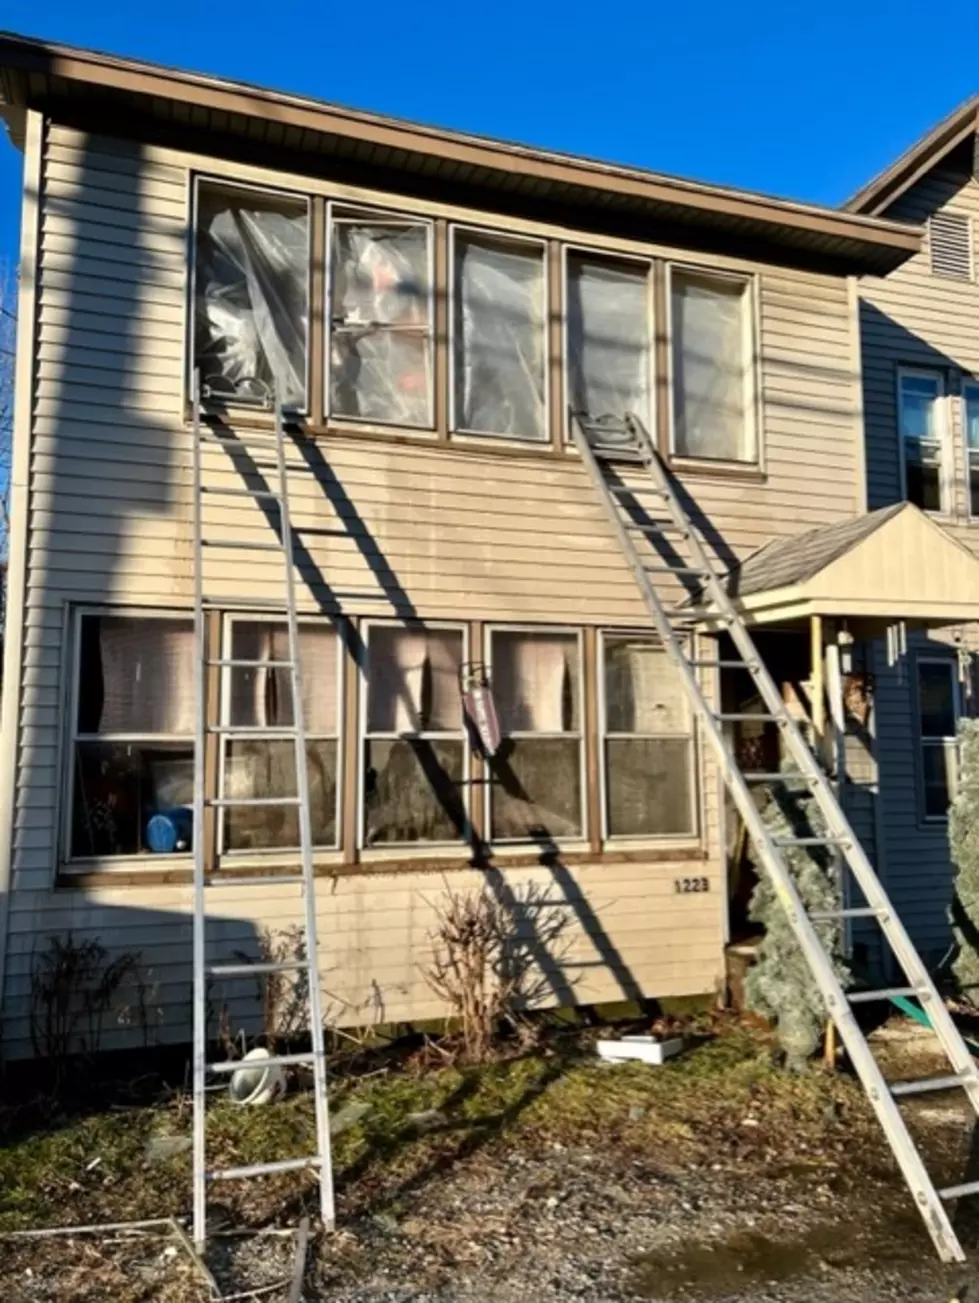 Pittsfield Structure’s Residents Alerted To Sunday Fire By Good Samaritan